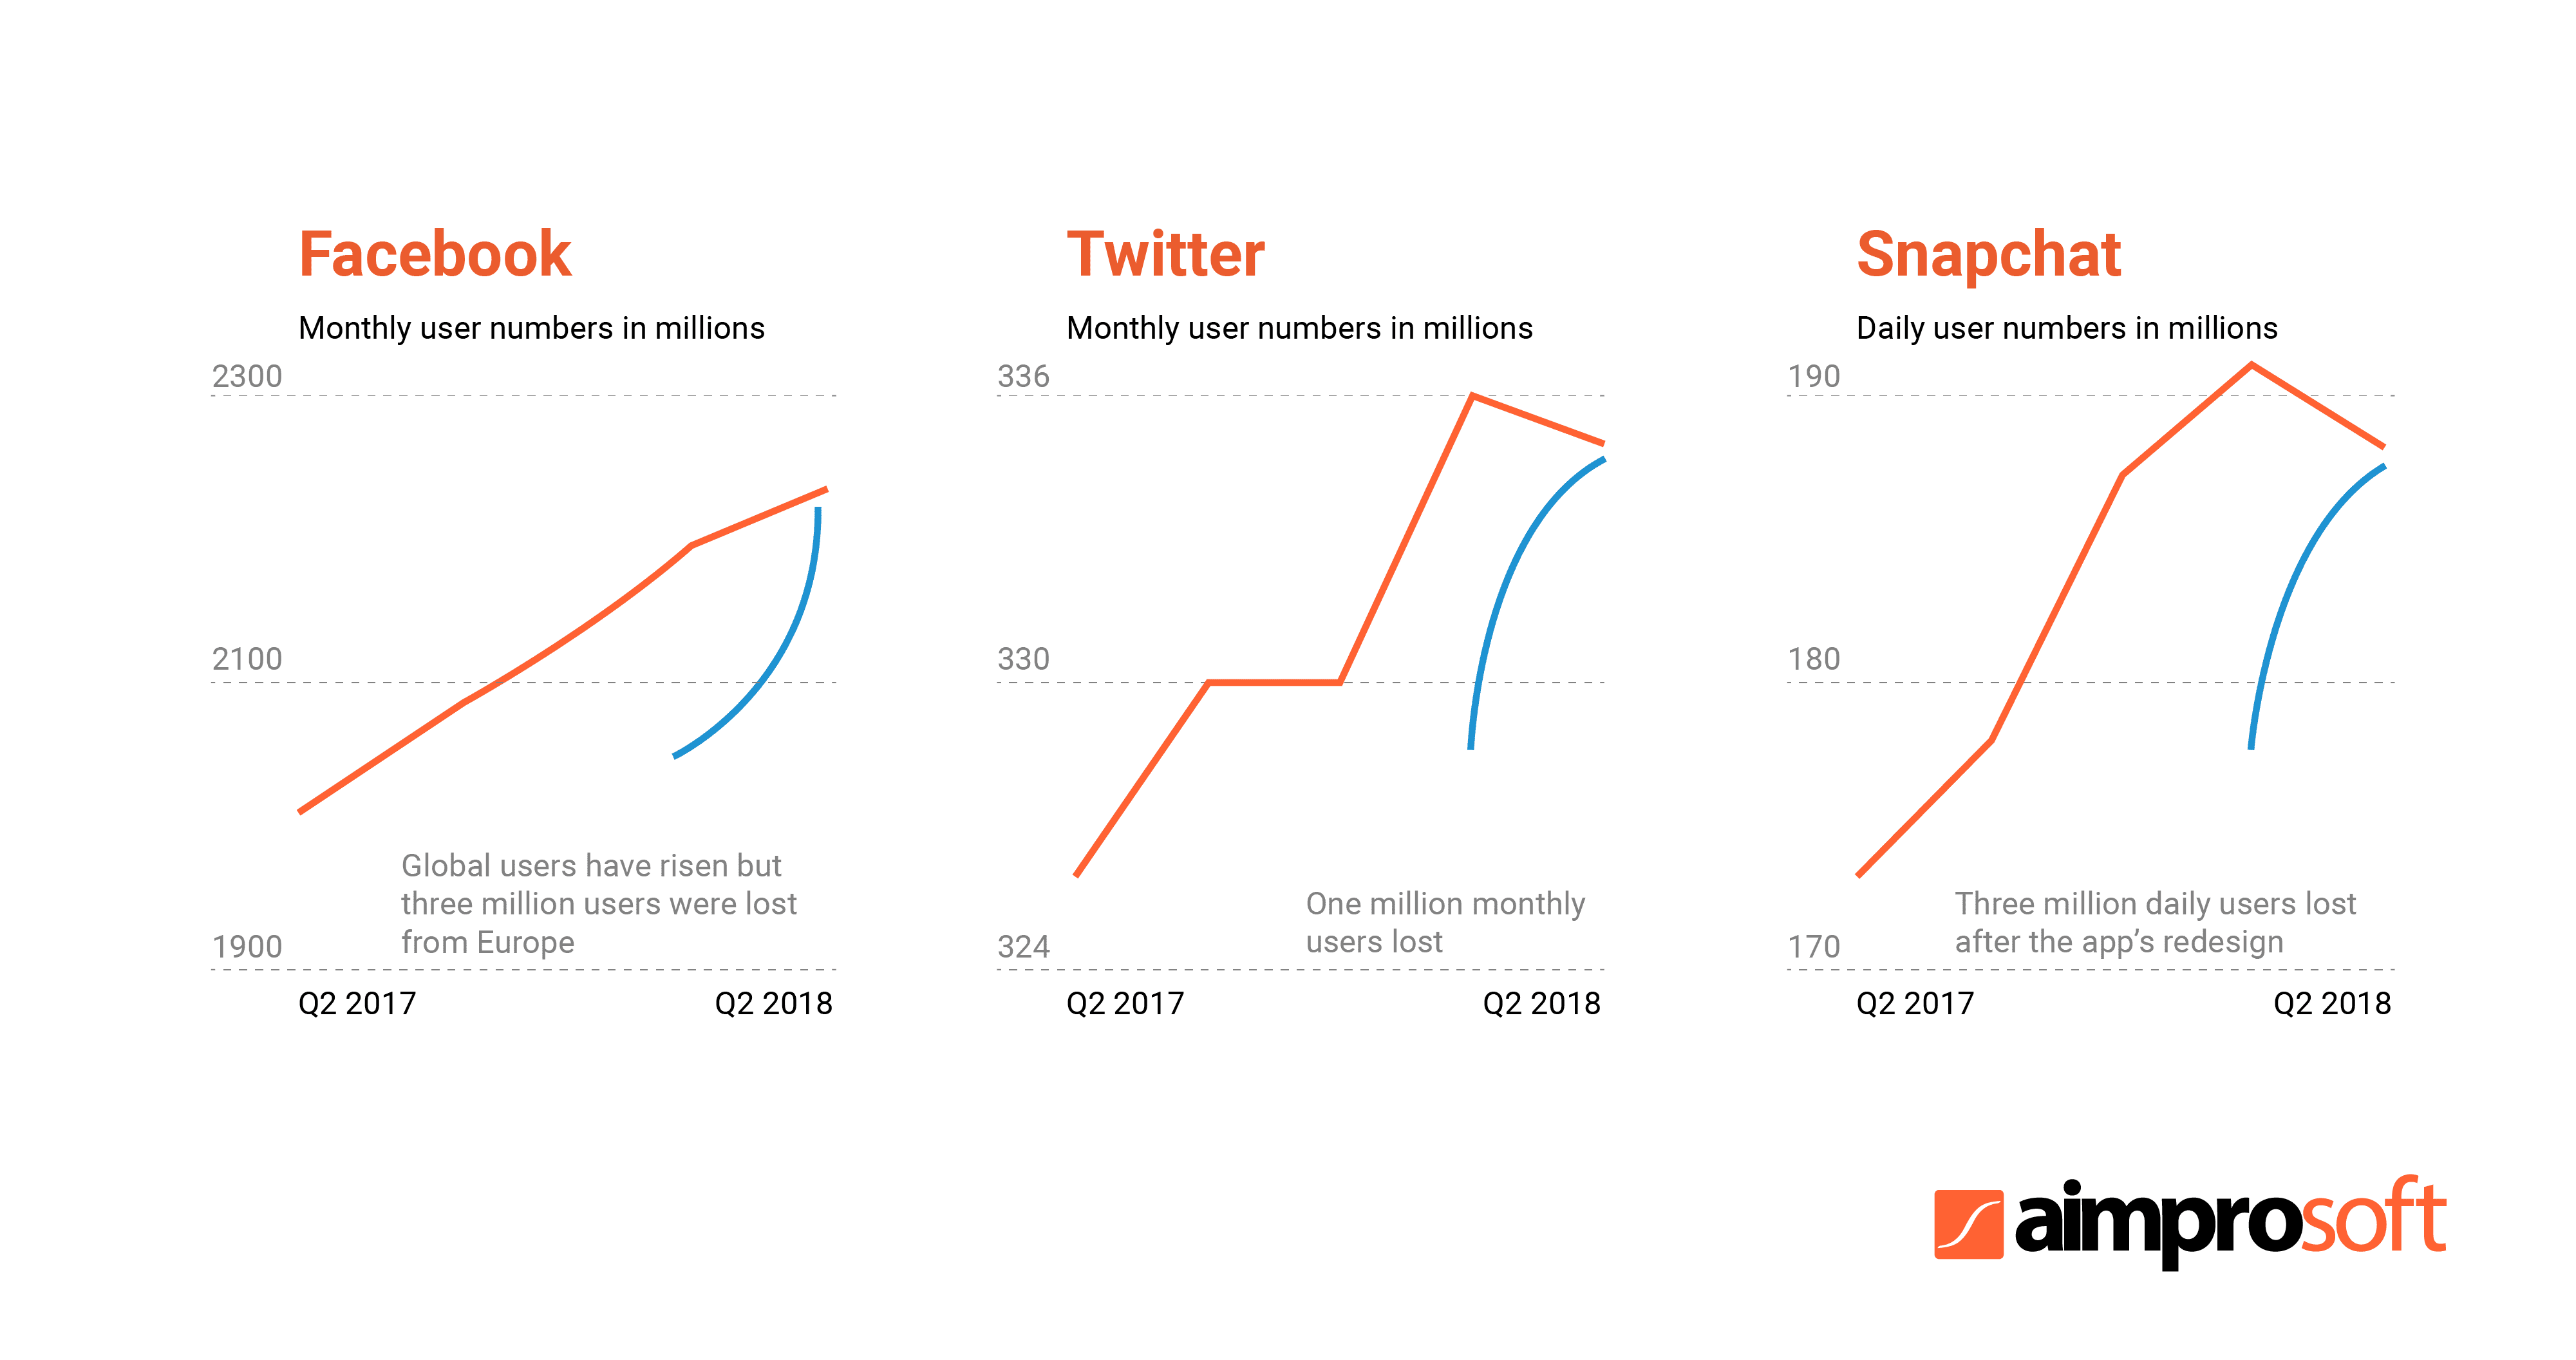 The drop in the number of Facebook, Twitter and Snapchat users, Q2 2017-Q2 2018